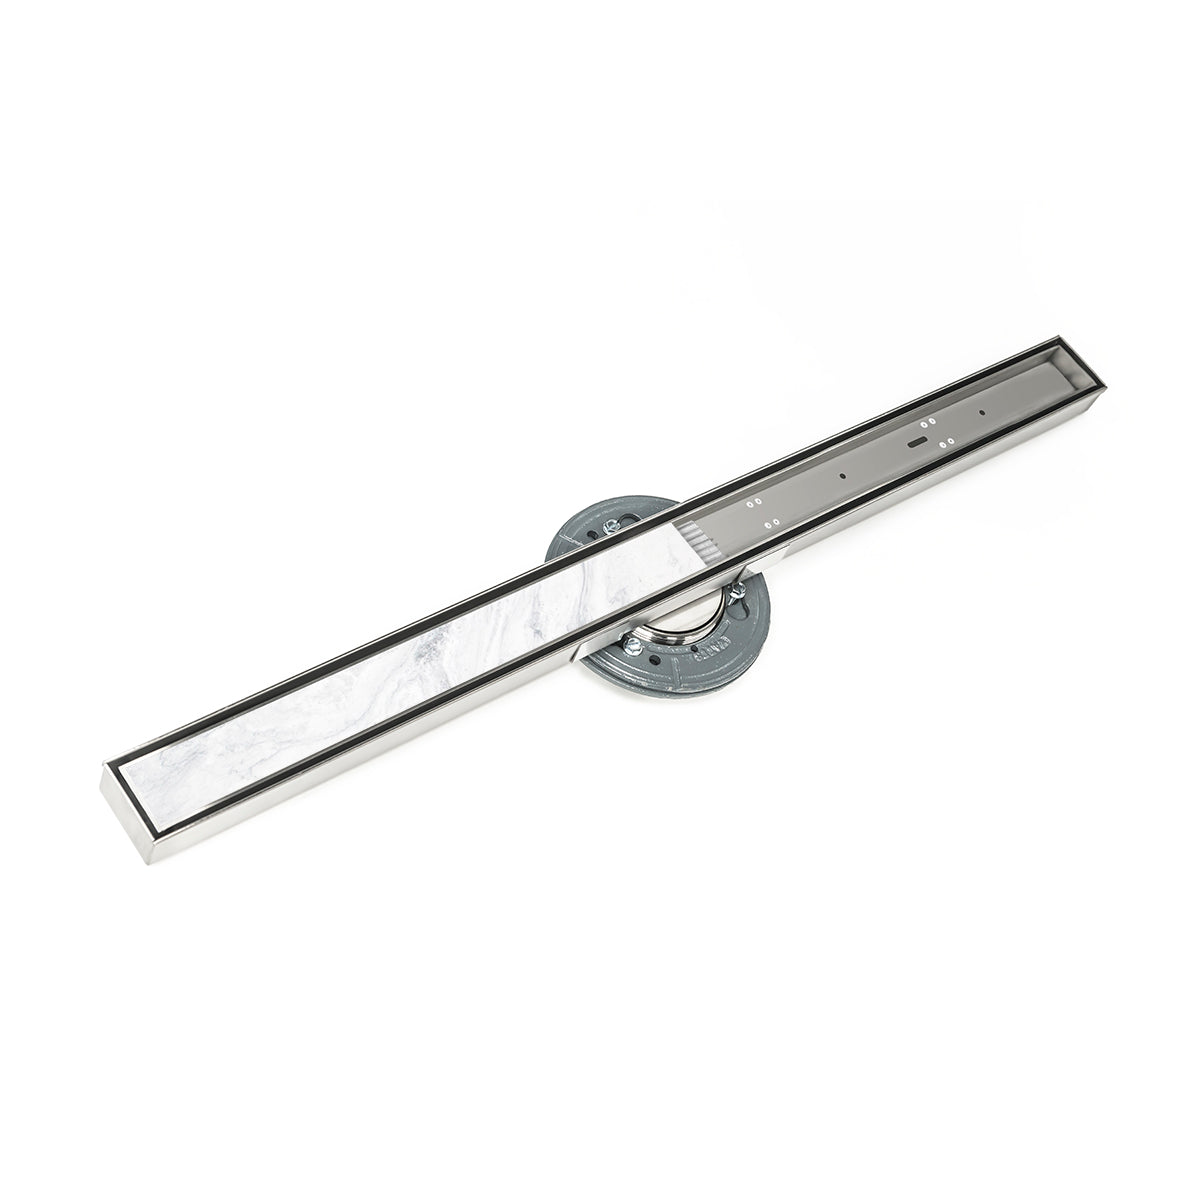 Infinity Drain 48" S-Stainless Steel Series High Flow Site Sizable Linear Drain Kit with Tile Insert Frame with PVC Drain Body, 3" Outlet